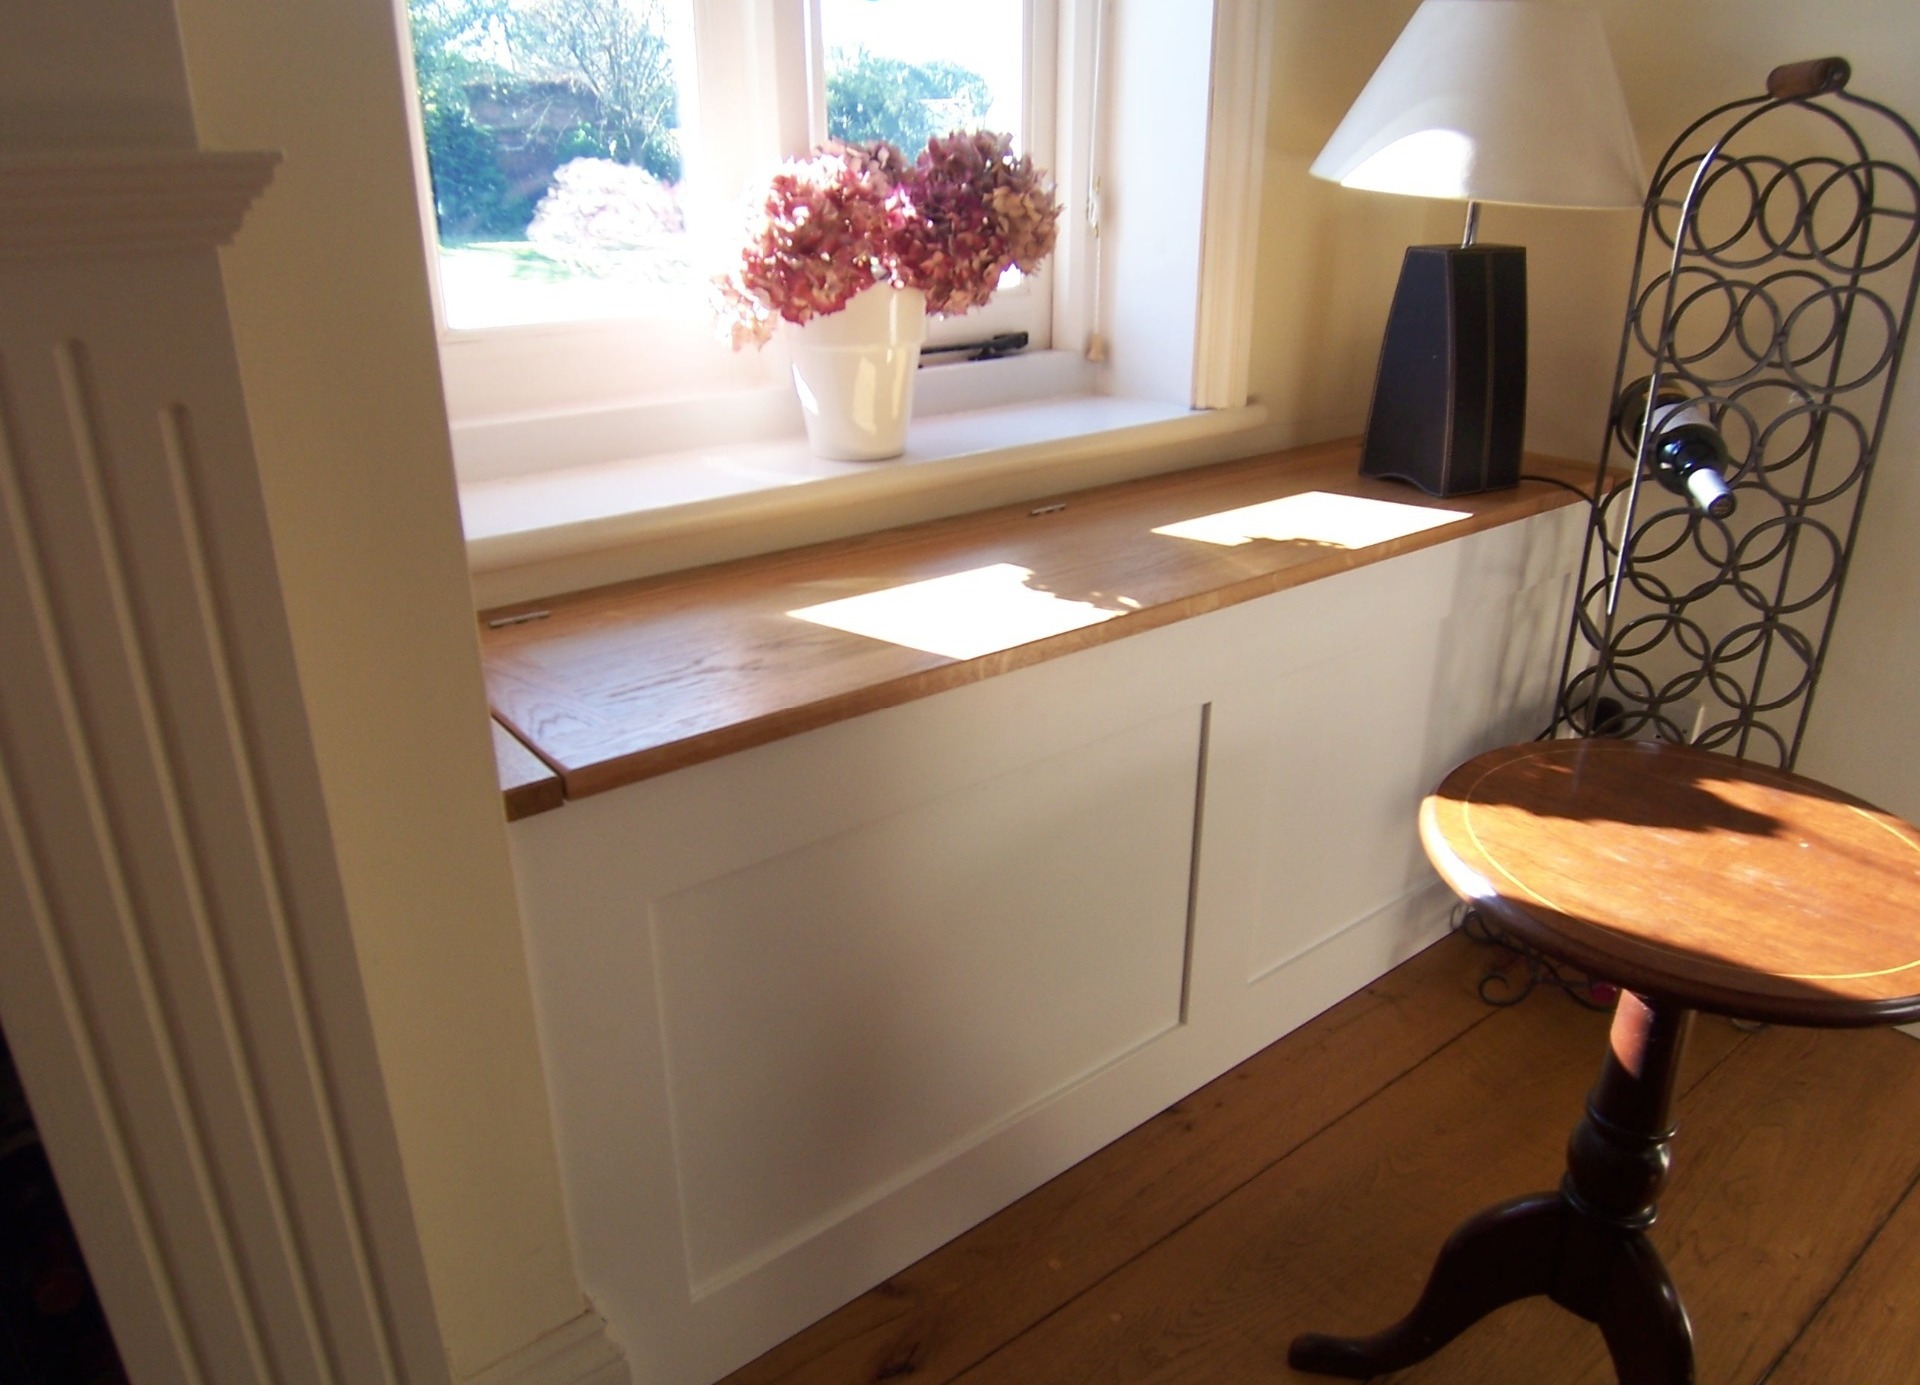 Built-in window seat with storage